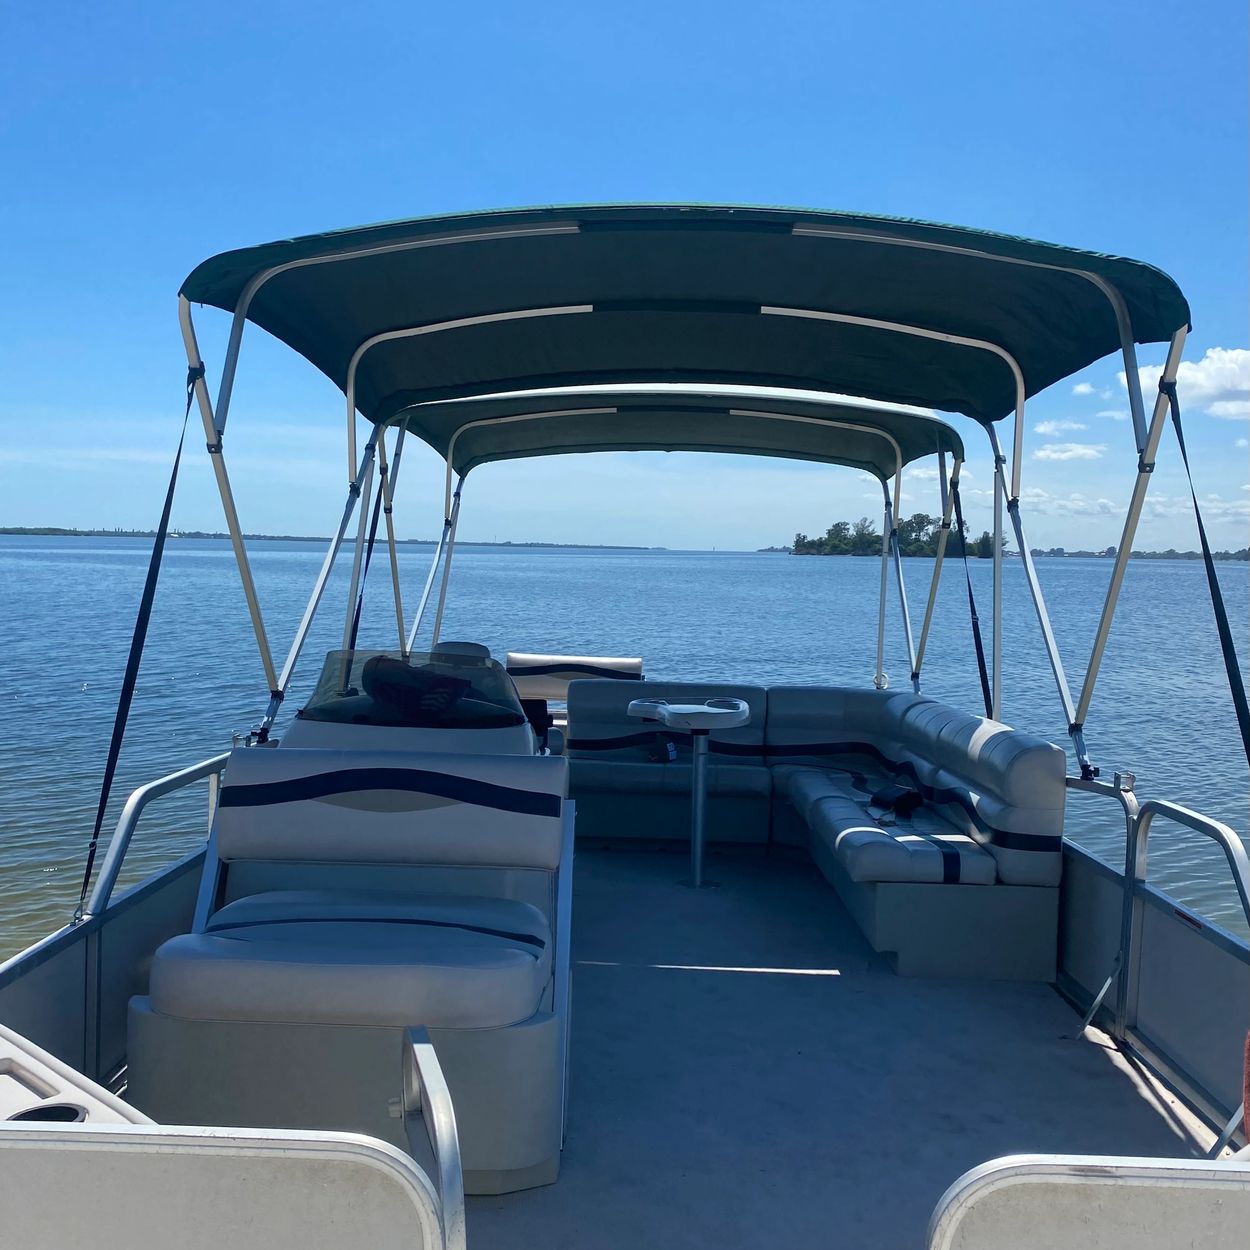 Enjoy your boat tours and inshore fishing charters aboard this comfortable, 24’ Pontoon boat with 2 